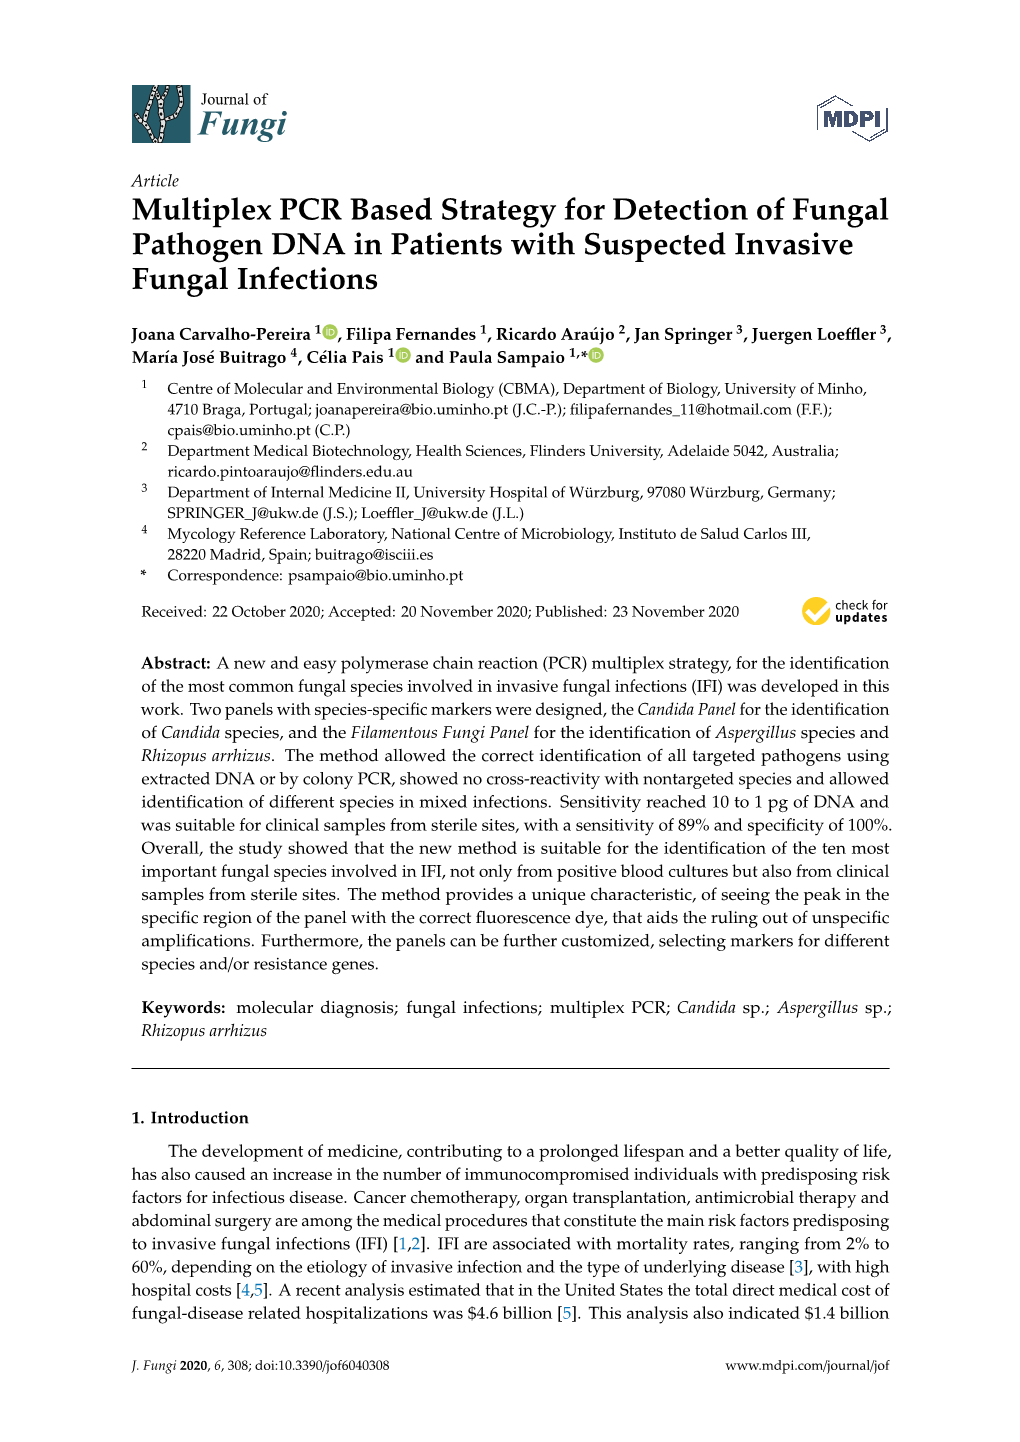 Multiplex PCR Based Strategy for Detection of Fungal Pathogen DNA in Patients with Suspected Invasive Fungal Infections